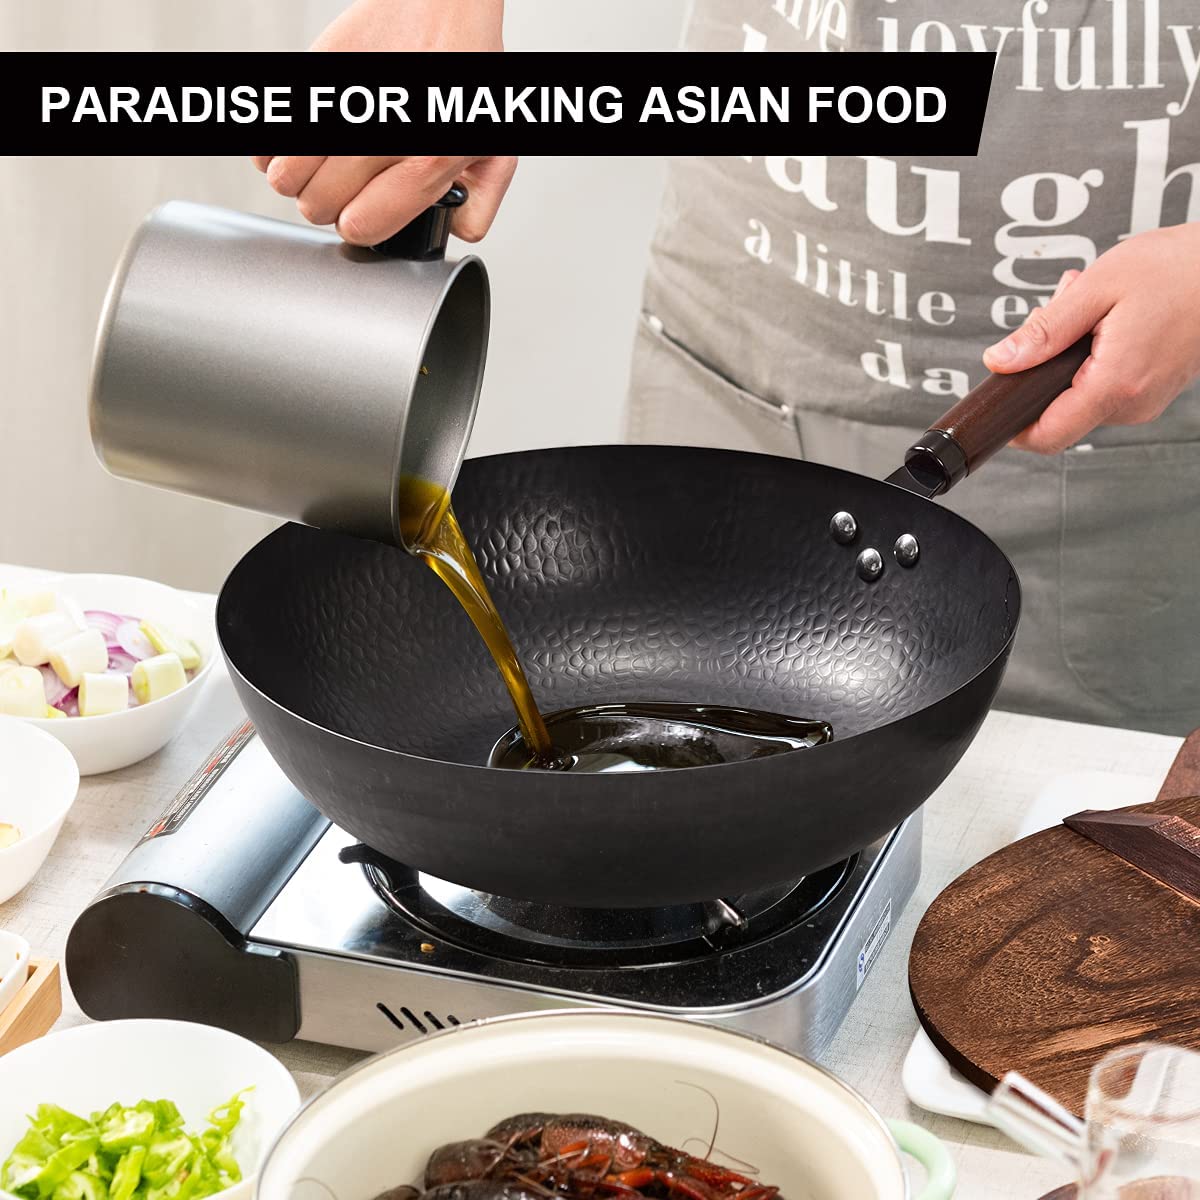 Wok Pan with Lid - 13 Nonstick Wok, Carbon Steel Woks & Stir-Fry Pans Set  with 7 Cookwares, No Chemical Coated Flat Bottom Chinese wok, for Electric